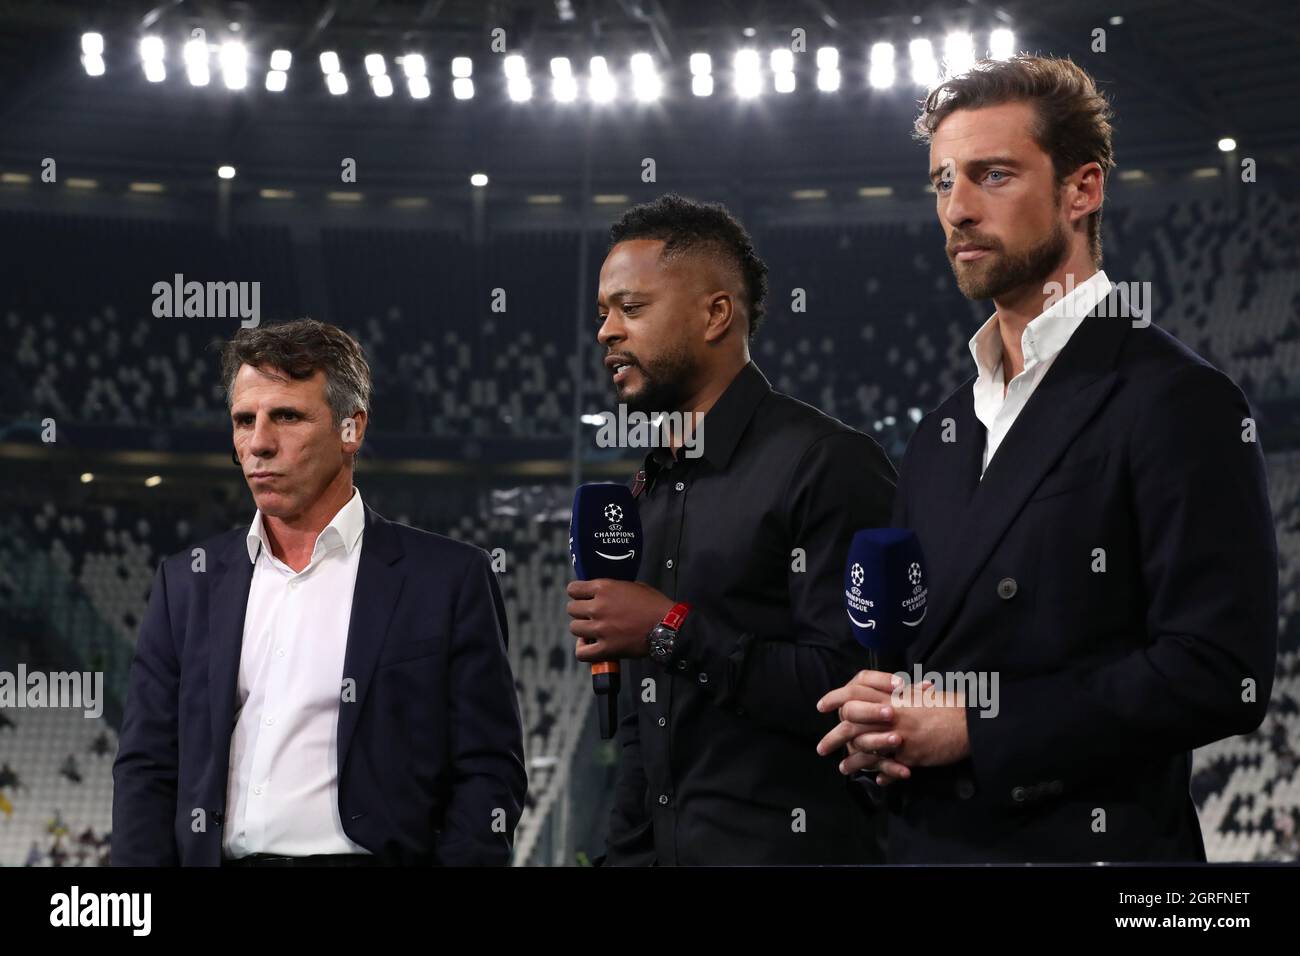 Turin, Italy. 29th Sep, 2021. Members of the Amazon Prime commentary team (  L to R ): Gianfranco Zola, Patrice Evra and Claudio Marchisio comment prior  to the UEFA Champions League match